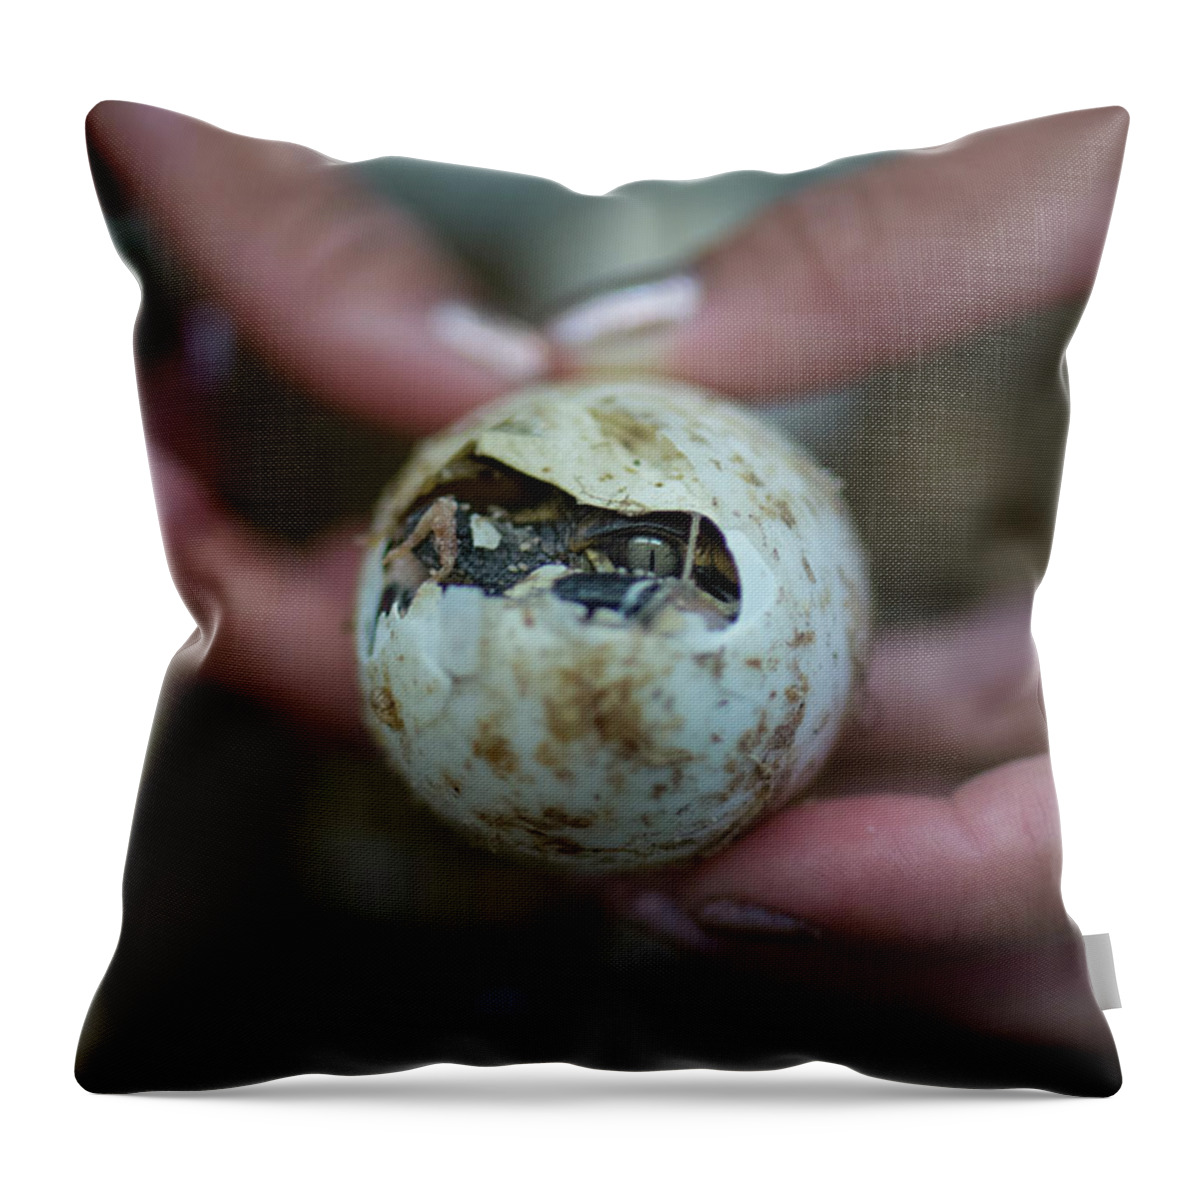 Hatchling Throw Pillow featuring the photograph Hatchling Alligator First Glimpse by Carolyn Hutchins